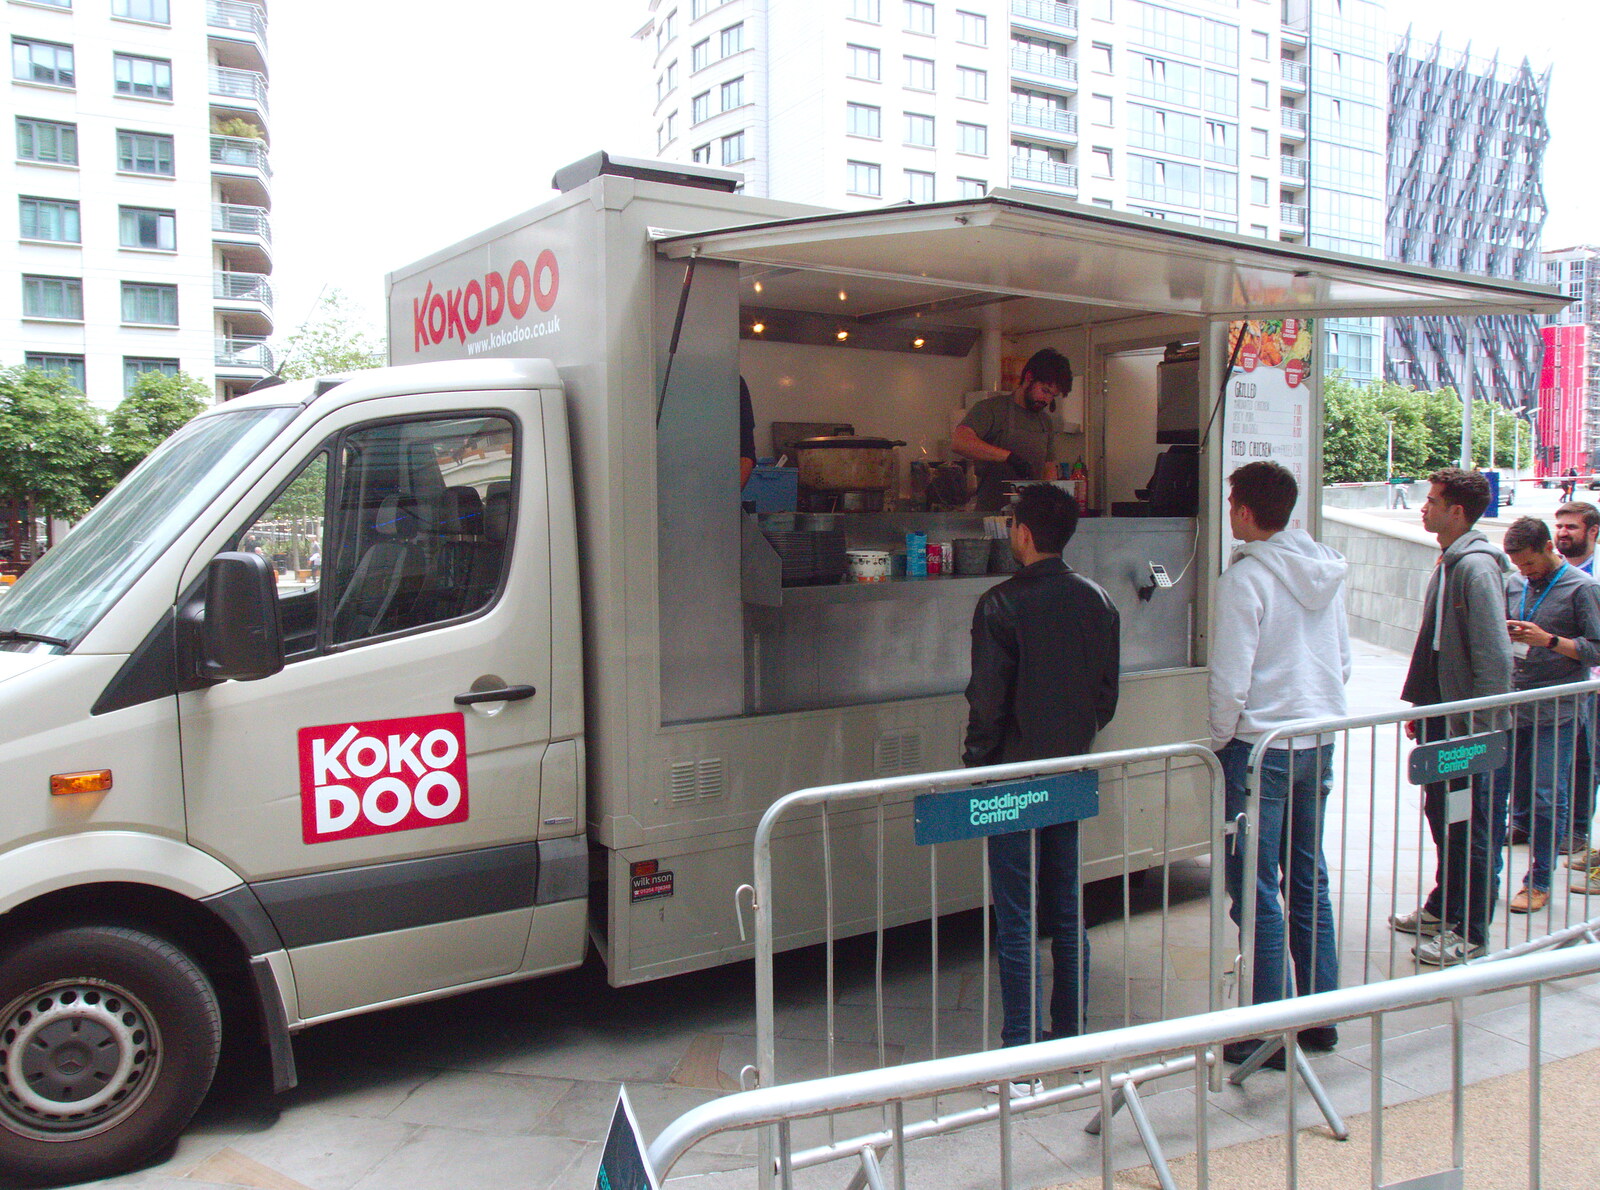 Nosher's back at work, but at least Kokodoo Korean van is in Sheldon Square from The Tom Cobley and a Return to Haytor, Bovey Tracey, Devon - 27th May 2019